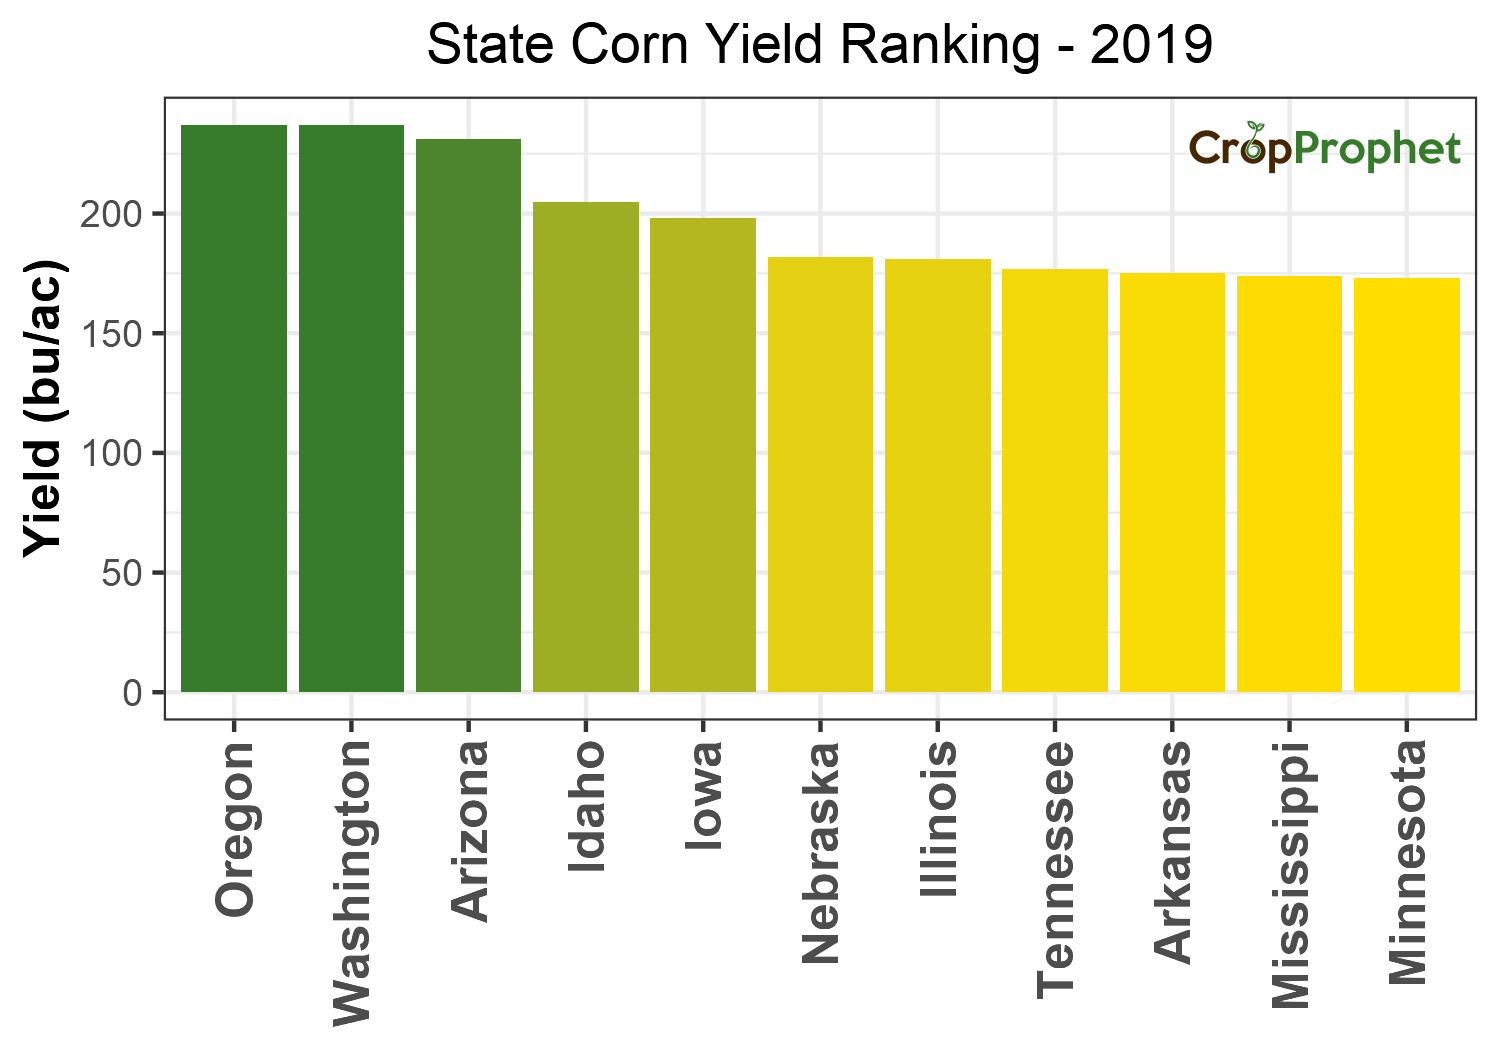 Corn Production by State - 2019 Rankings